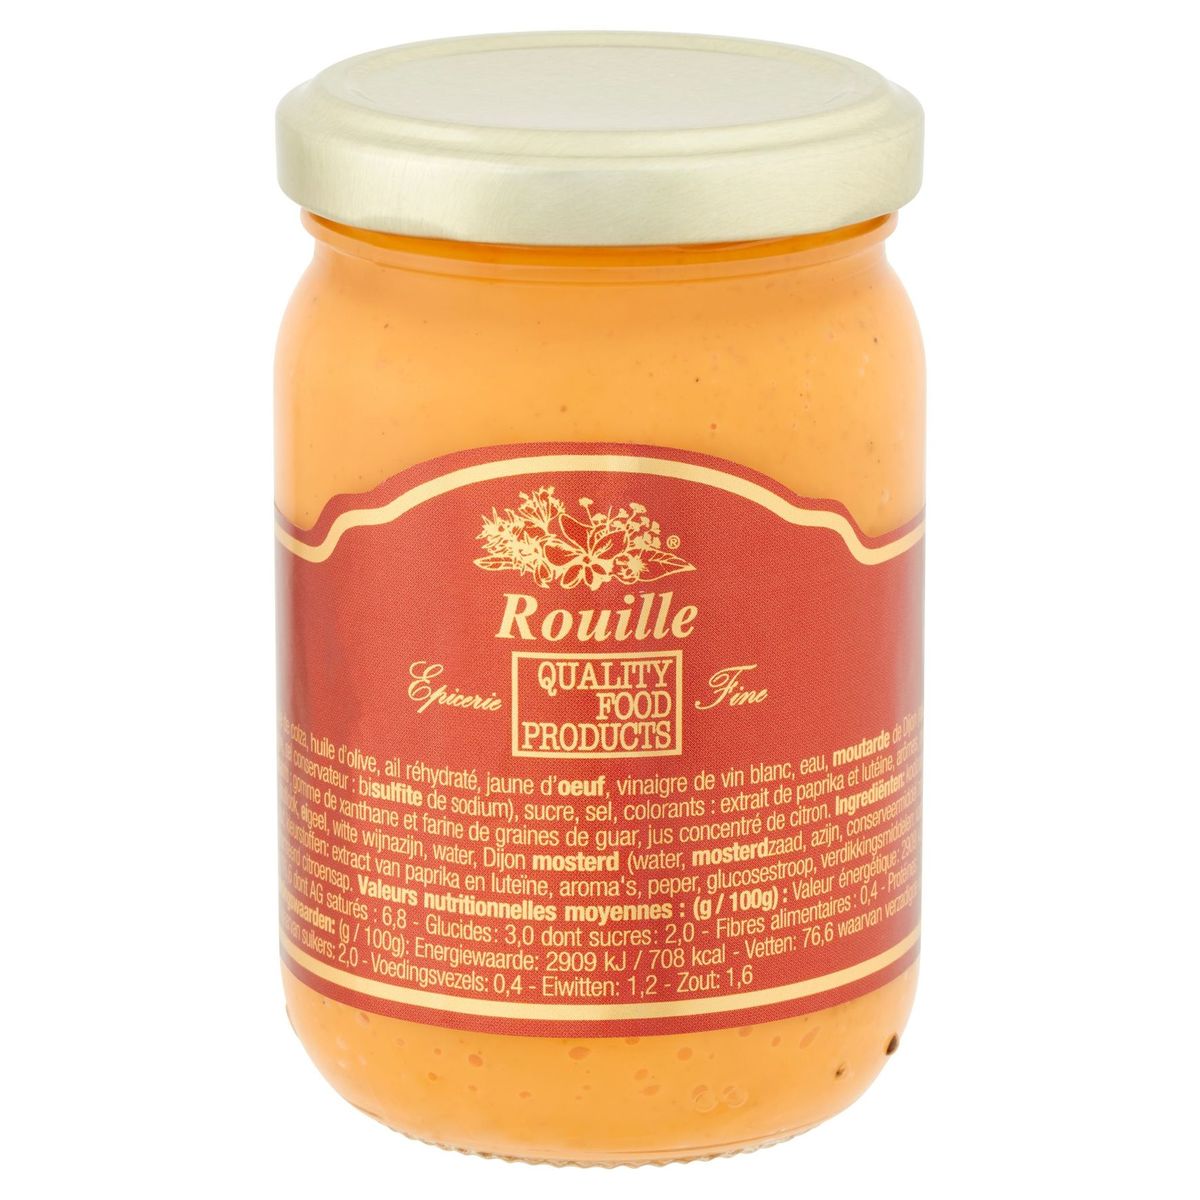 Quality Food Products Rouille 185 g